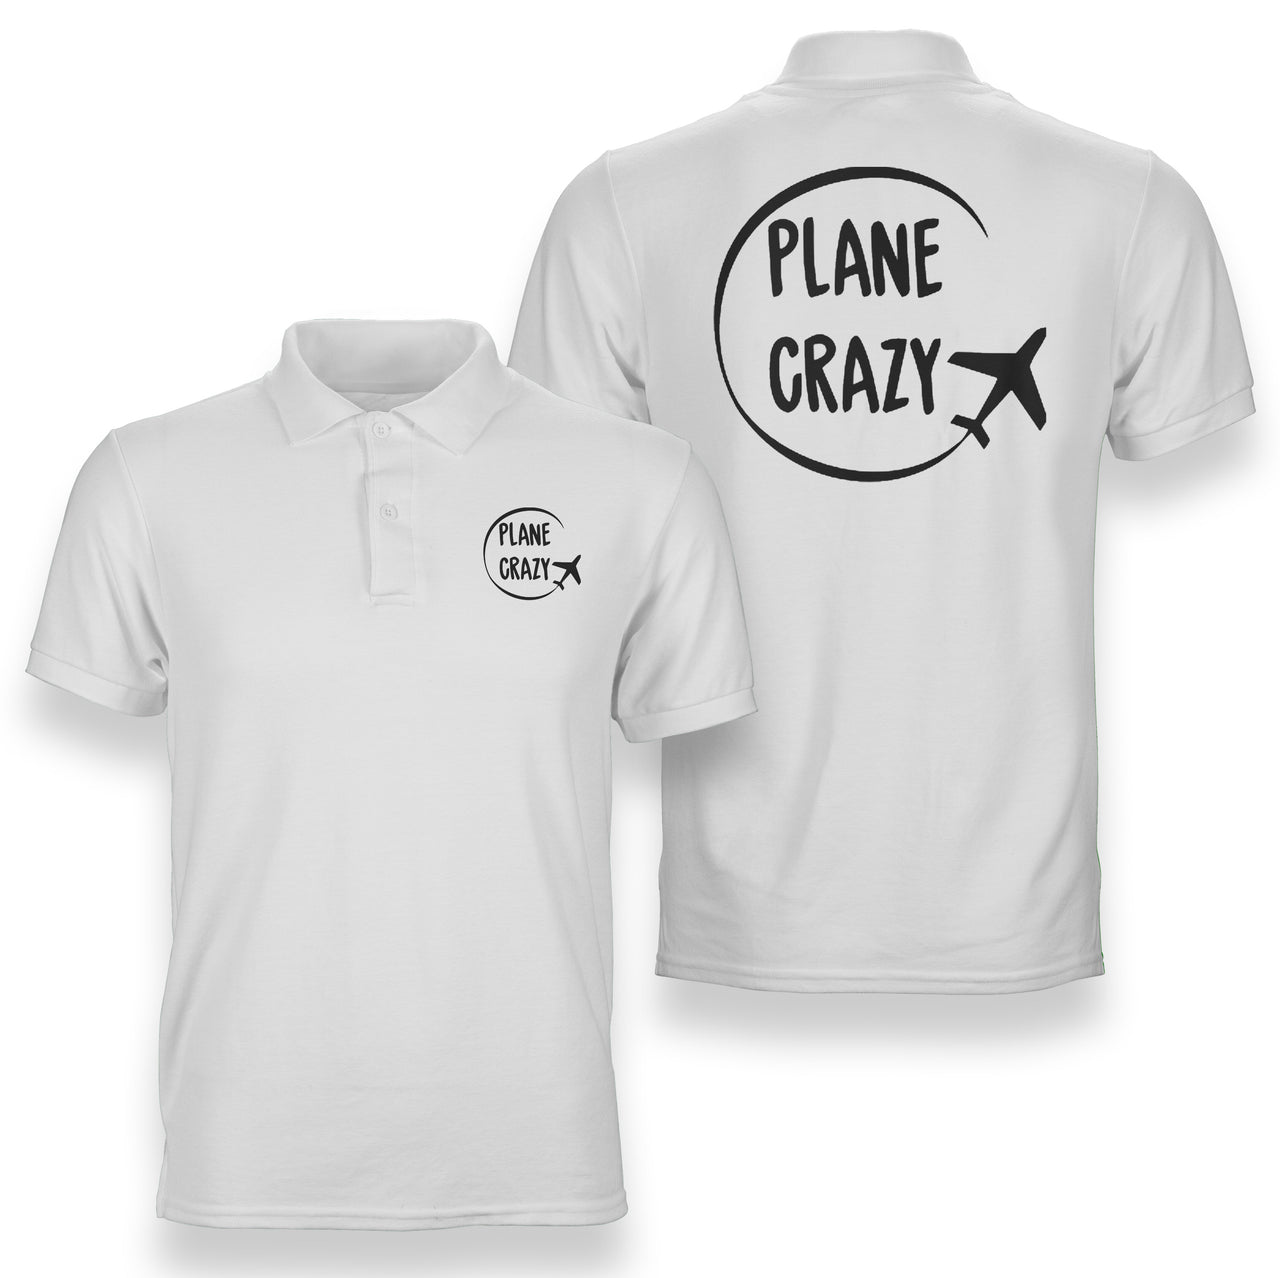 Plane Crazy Designed Double Side Polo T-Shirts